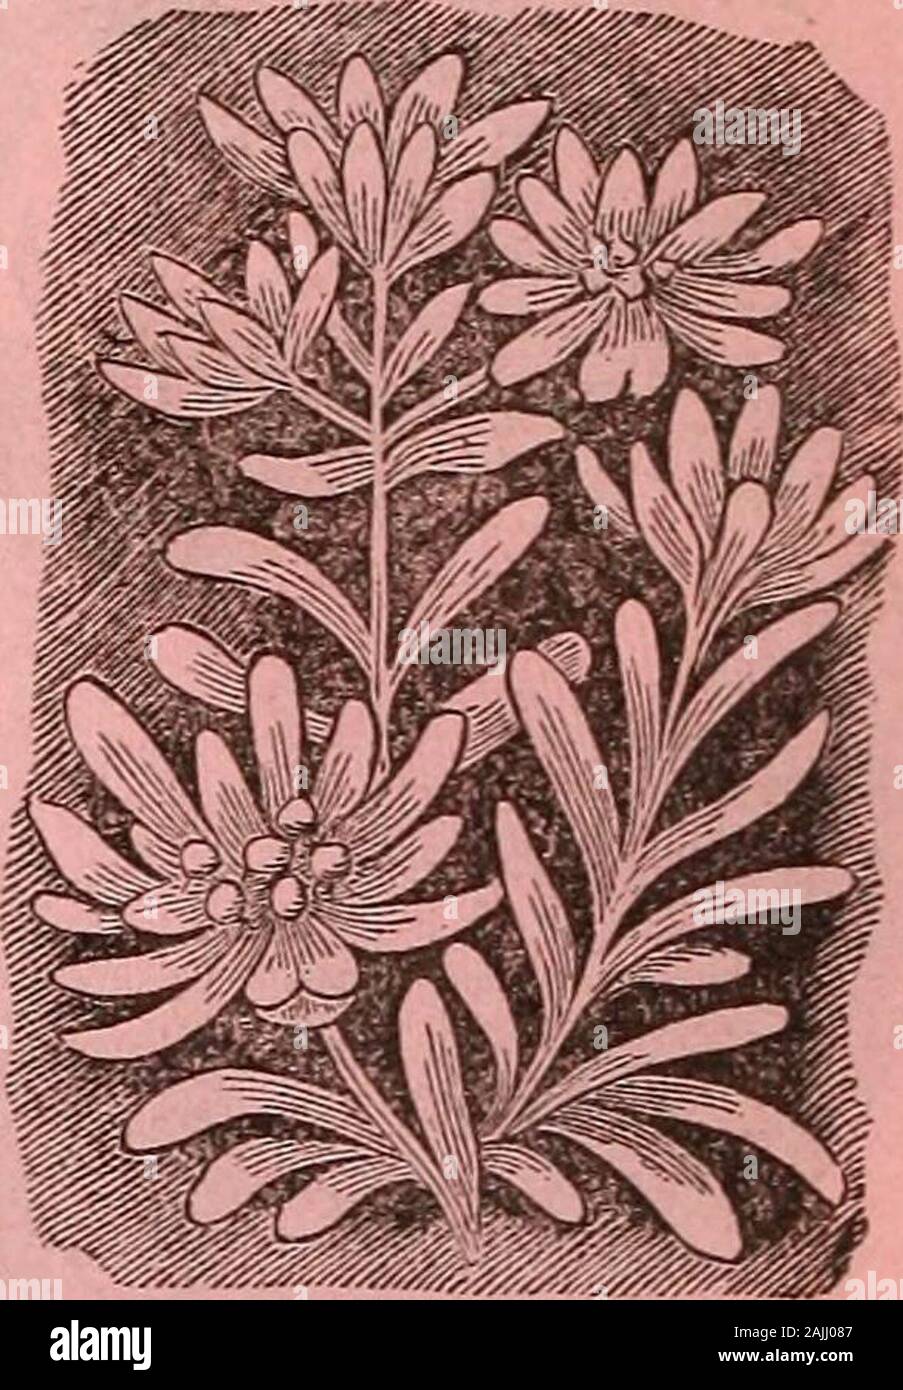 Dreer's garden calendar : 1884 . SINGLE DAHLIA. gnaphalium leontopouifm(edelweiss.) ^^^- grow in aboiit a fortnight; replanted and putin a cool frame, they will be fit for plantingout of doors in about six weeks. Any goodgarden soil, not too stiff, will be sufficient,and a good place moderately exposed to thesun will suit them. In the winter a thincover of jeaves w-ill be of use. 2^ cts.GAILLARDIA, Picta Lorenziana. Thisis a new charming profuse-flowering so-called double variety, although in the bo-tanical sense of the word it is not double,but entirely distinct from the single-flower-ing. We Stock Photo